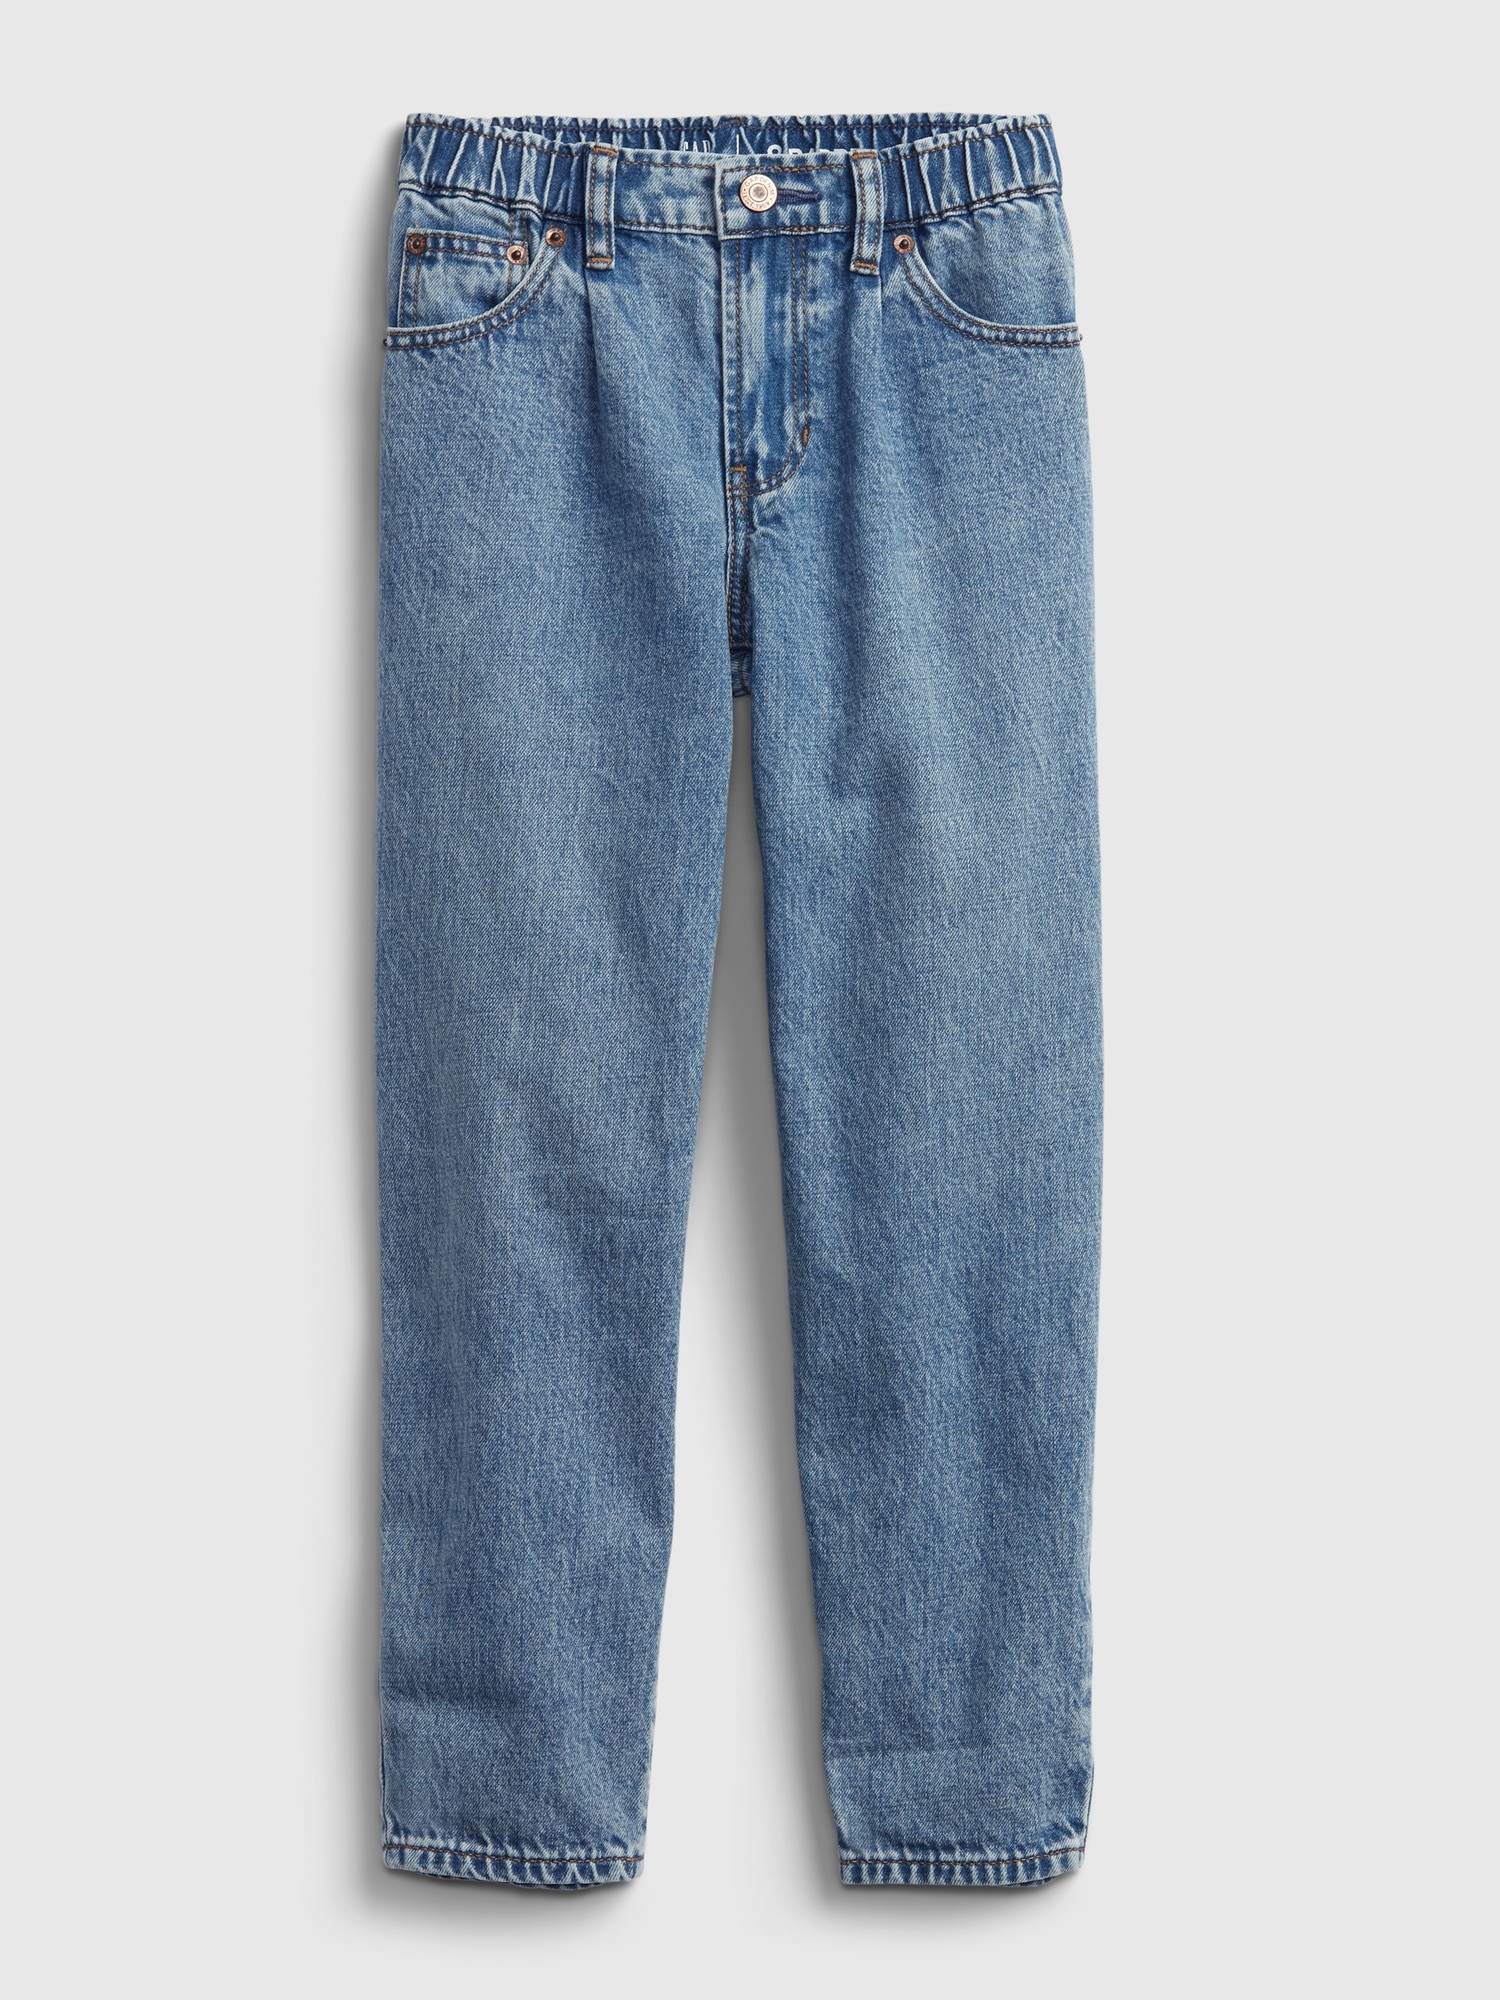 Kids Barrel Jeans with Washwell ™ | Gap